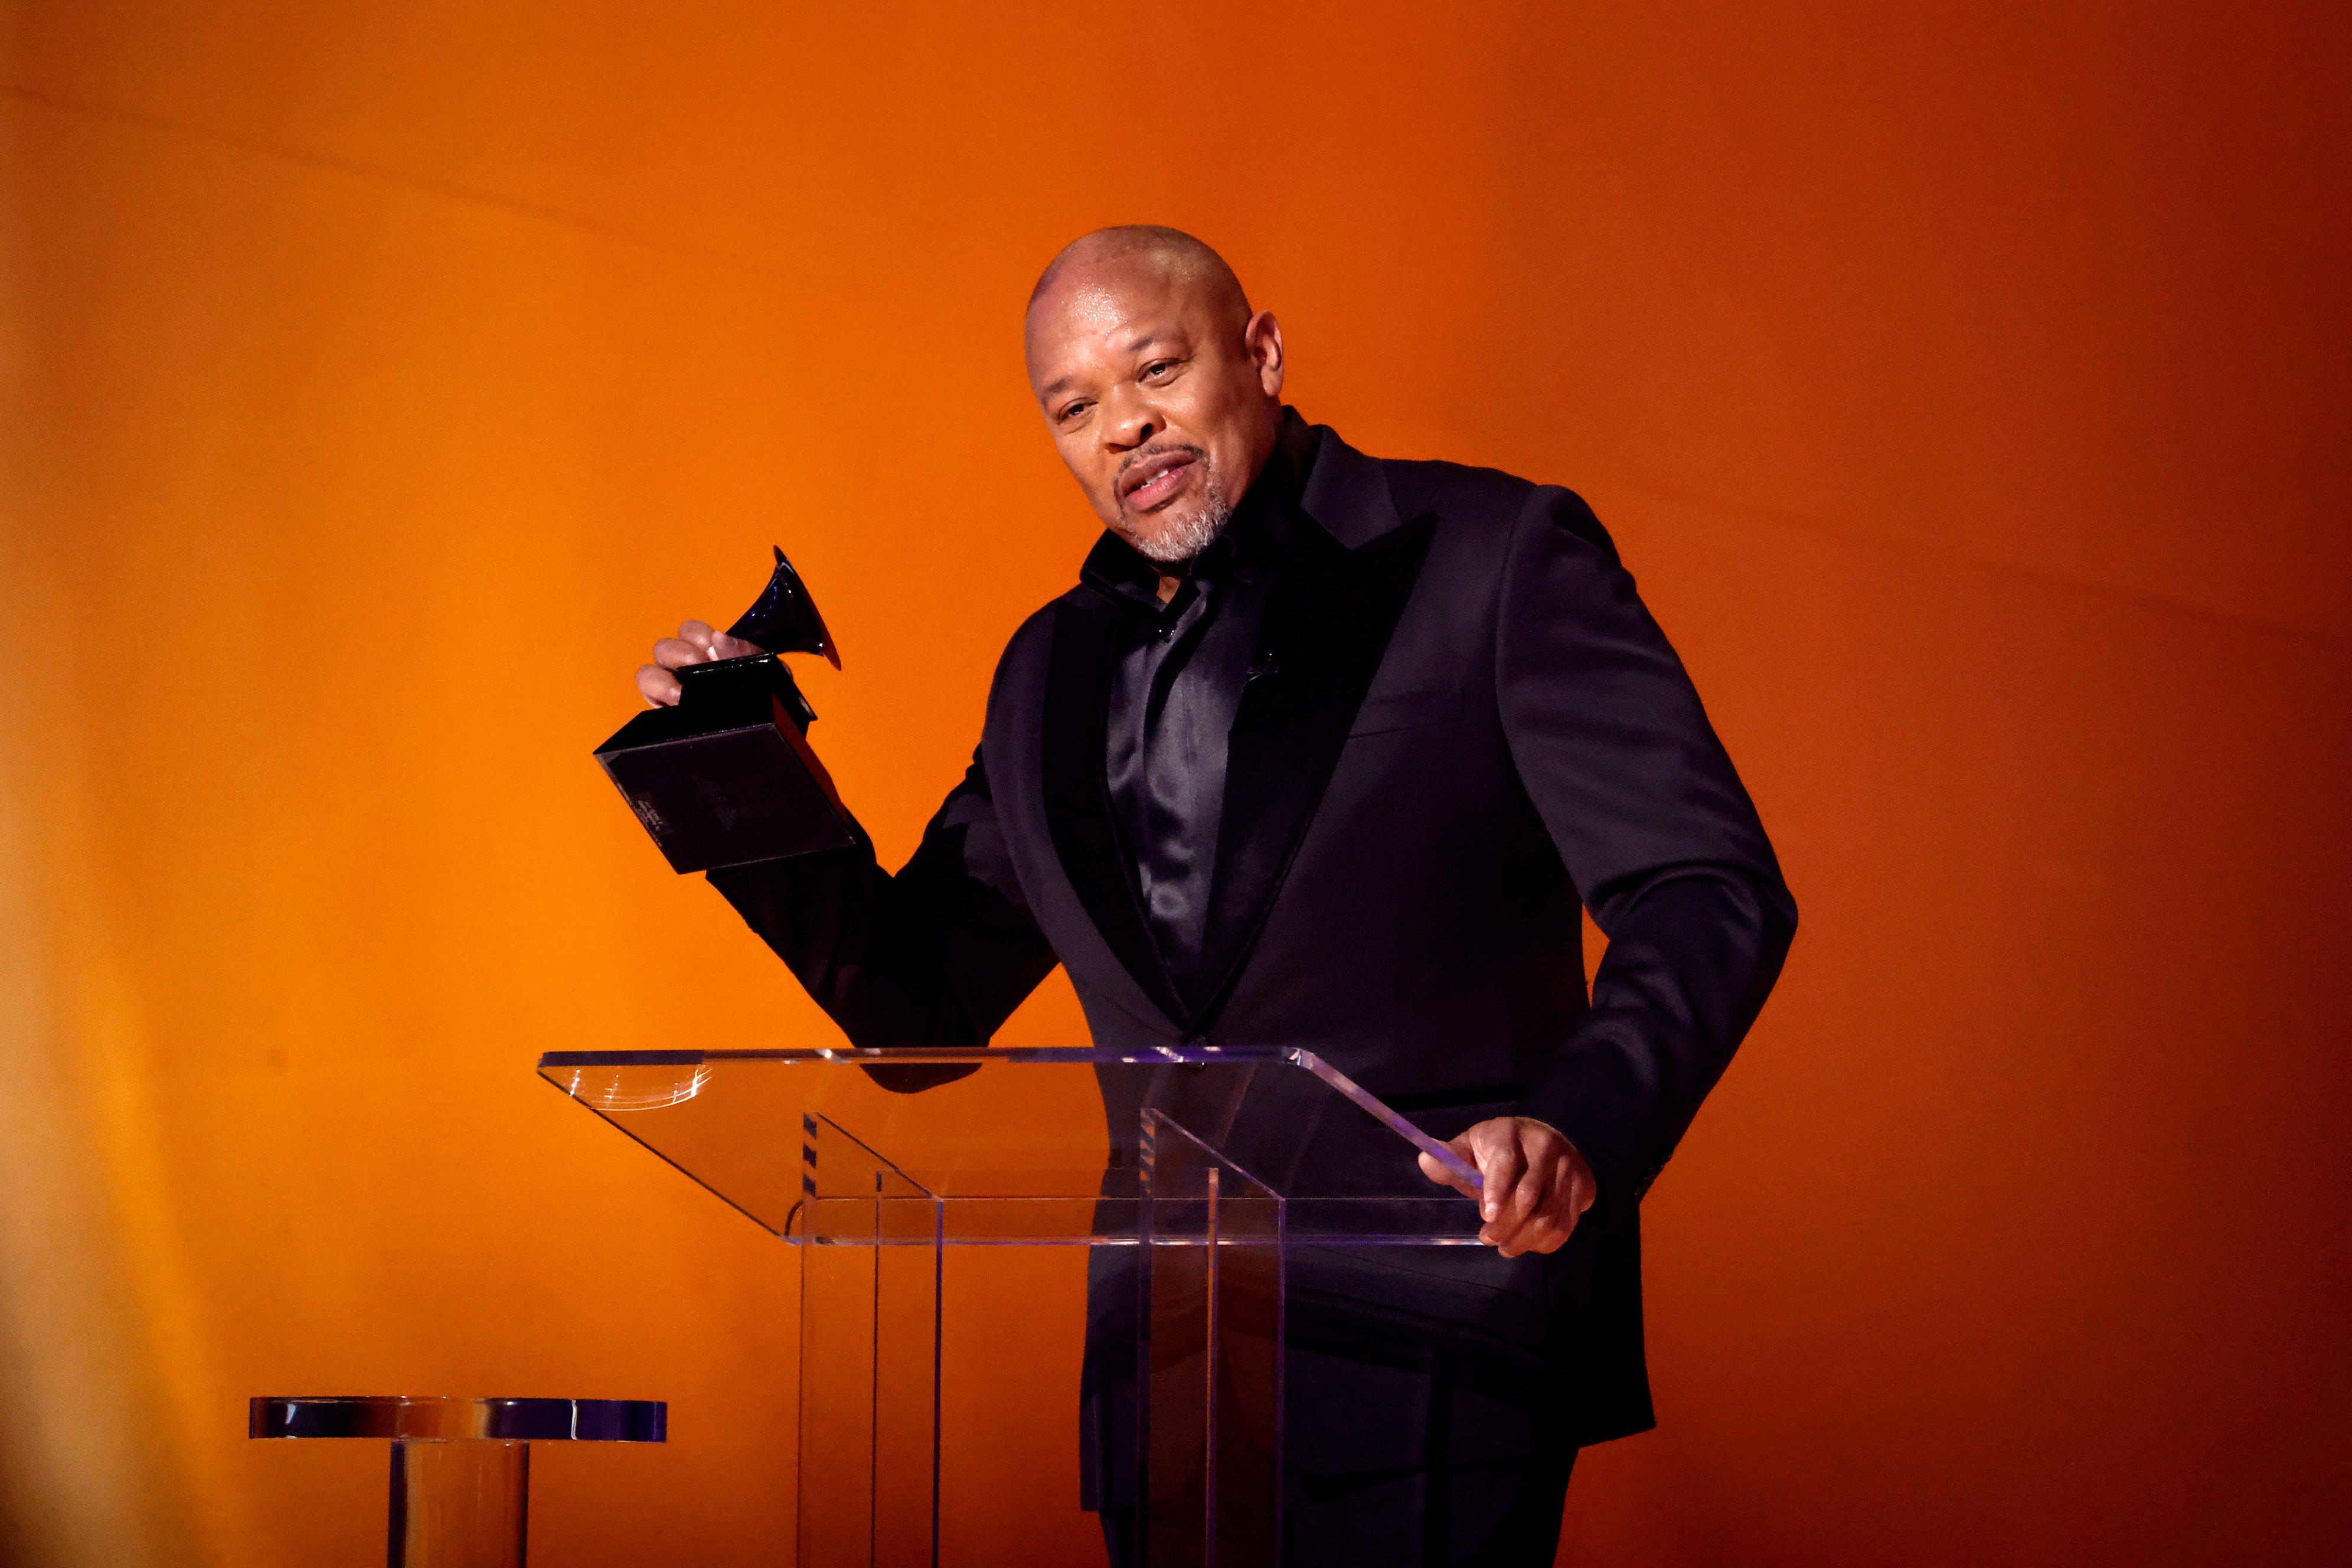 Dr. Dre Is The Recipient Of The Inaugural Dr. Dre Global Impact